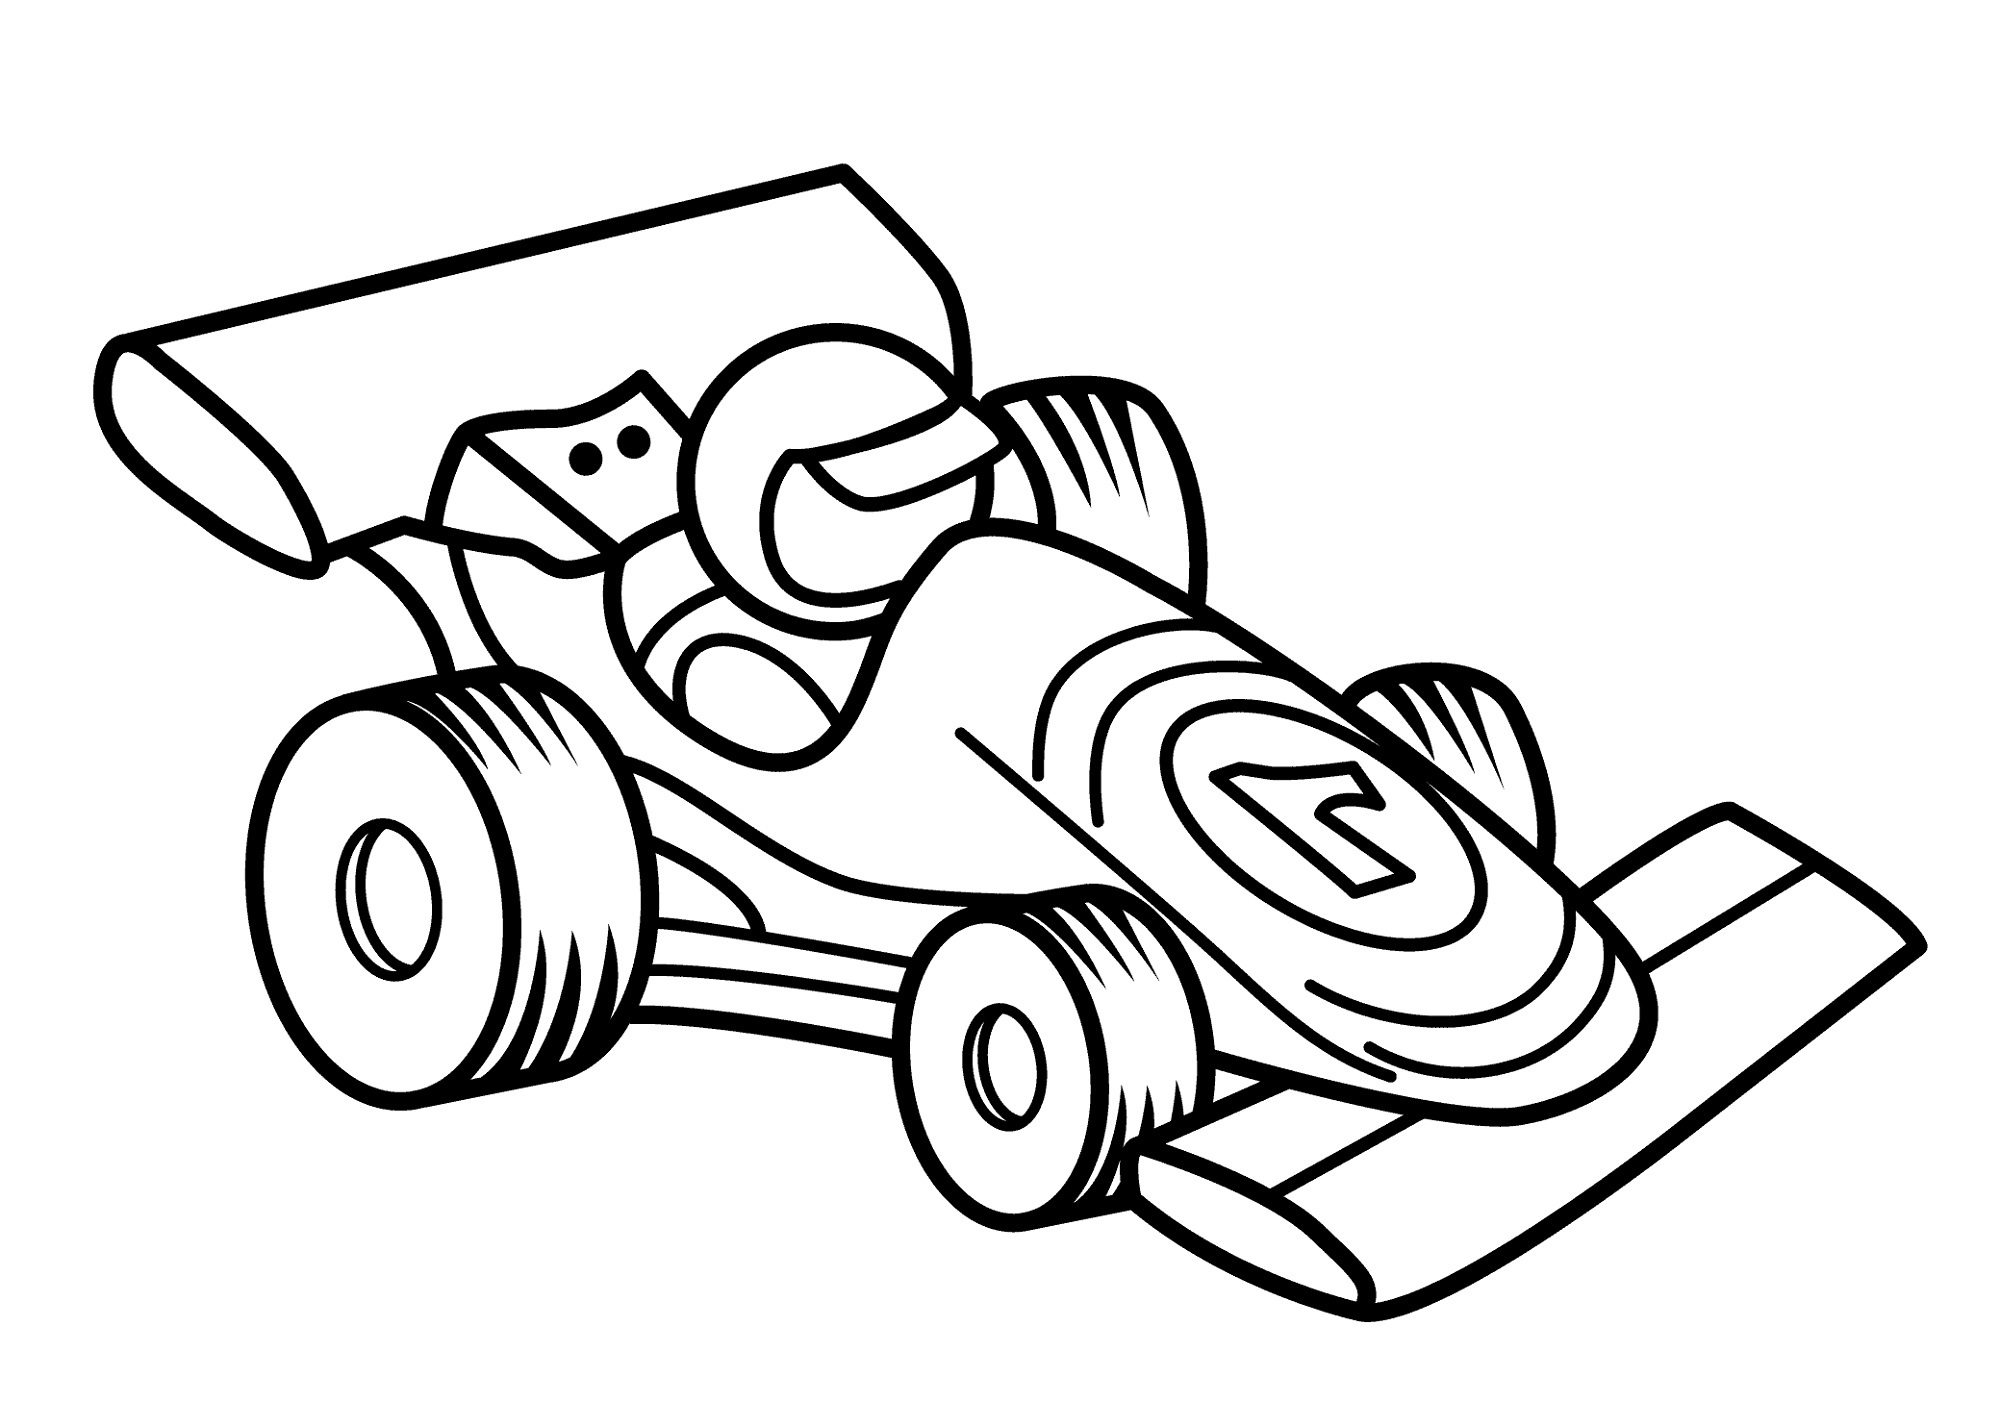 Coloring Pages Archives | 101 Activity